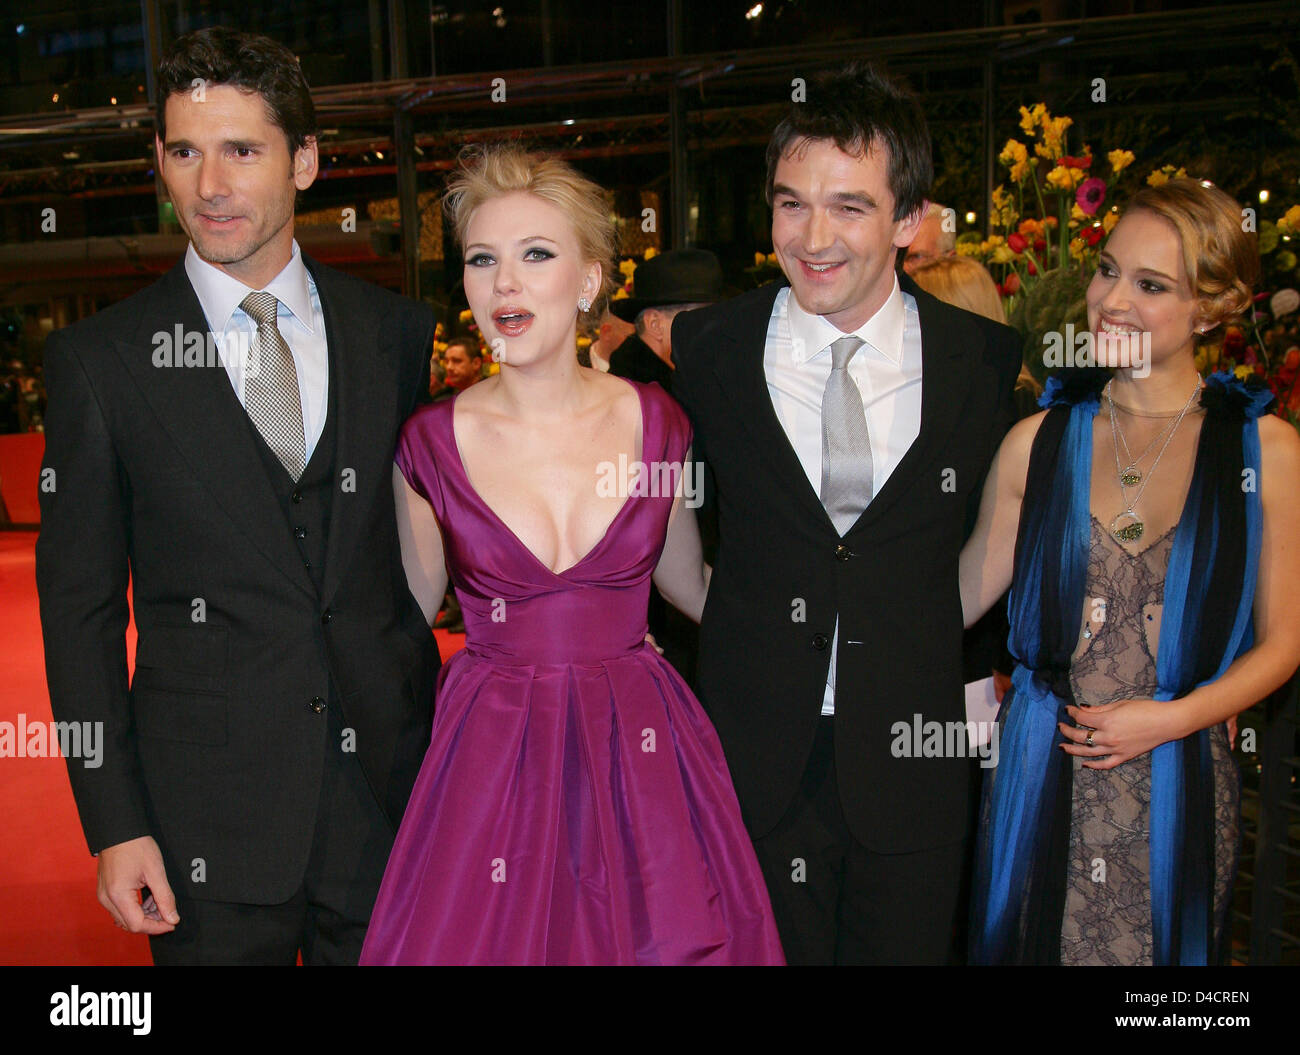 (L-R) Australian actor Eric Bana, US actress Scarlett Johansson, British director Justin Chadwick, and Israel-born actress Natalie Portman arrive for the premiere of their film 'The Other Boleyn Girl' at the 58th Berlin International Film Festival, in Berlin, Germany, 15 February 2008. The film runs in competition for the Golden and Silver Bears at the 58th Berlinale. Photo: Jens K Stock Photo